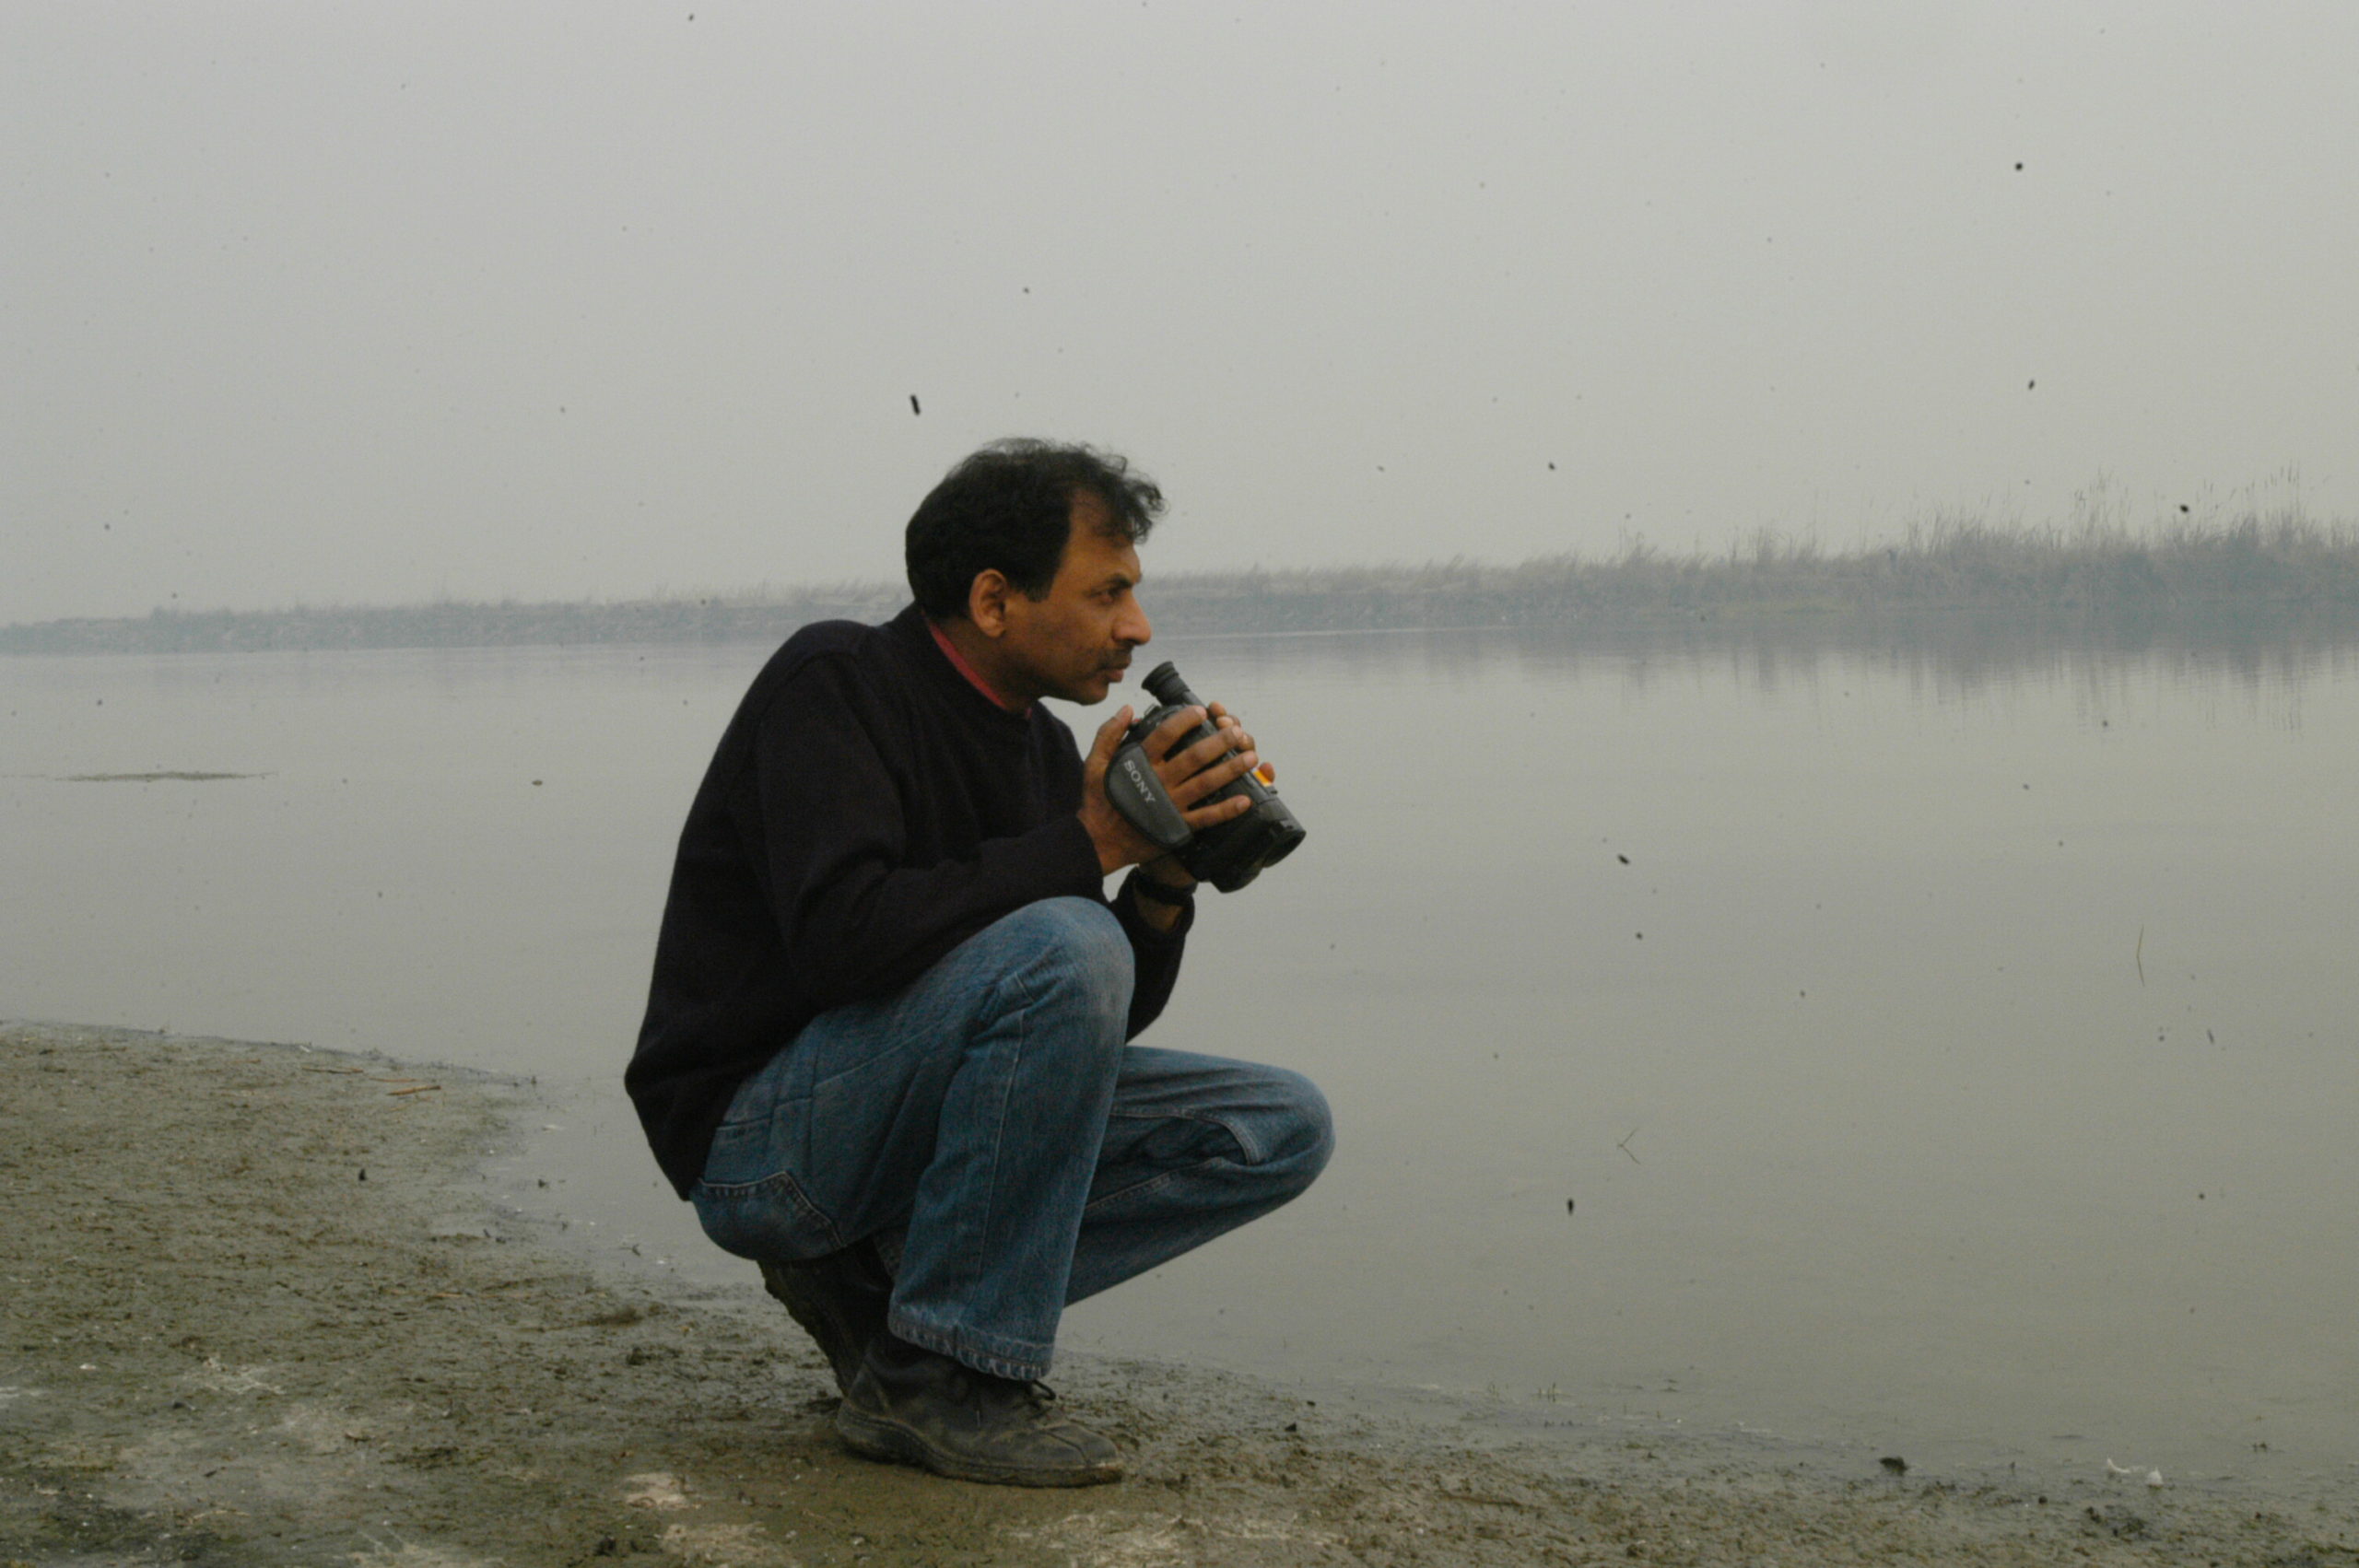 With a grey, cloudy landscape of a lake in the foreground, Ravi Agarawl crouches down over the water with a camcorder in his hands